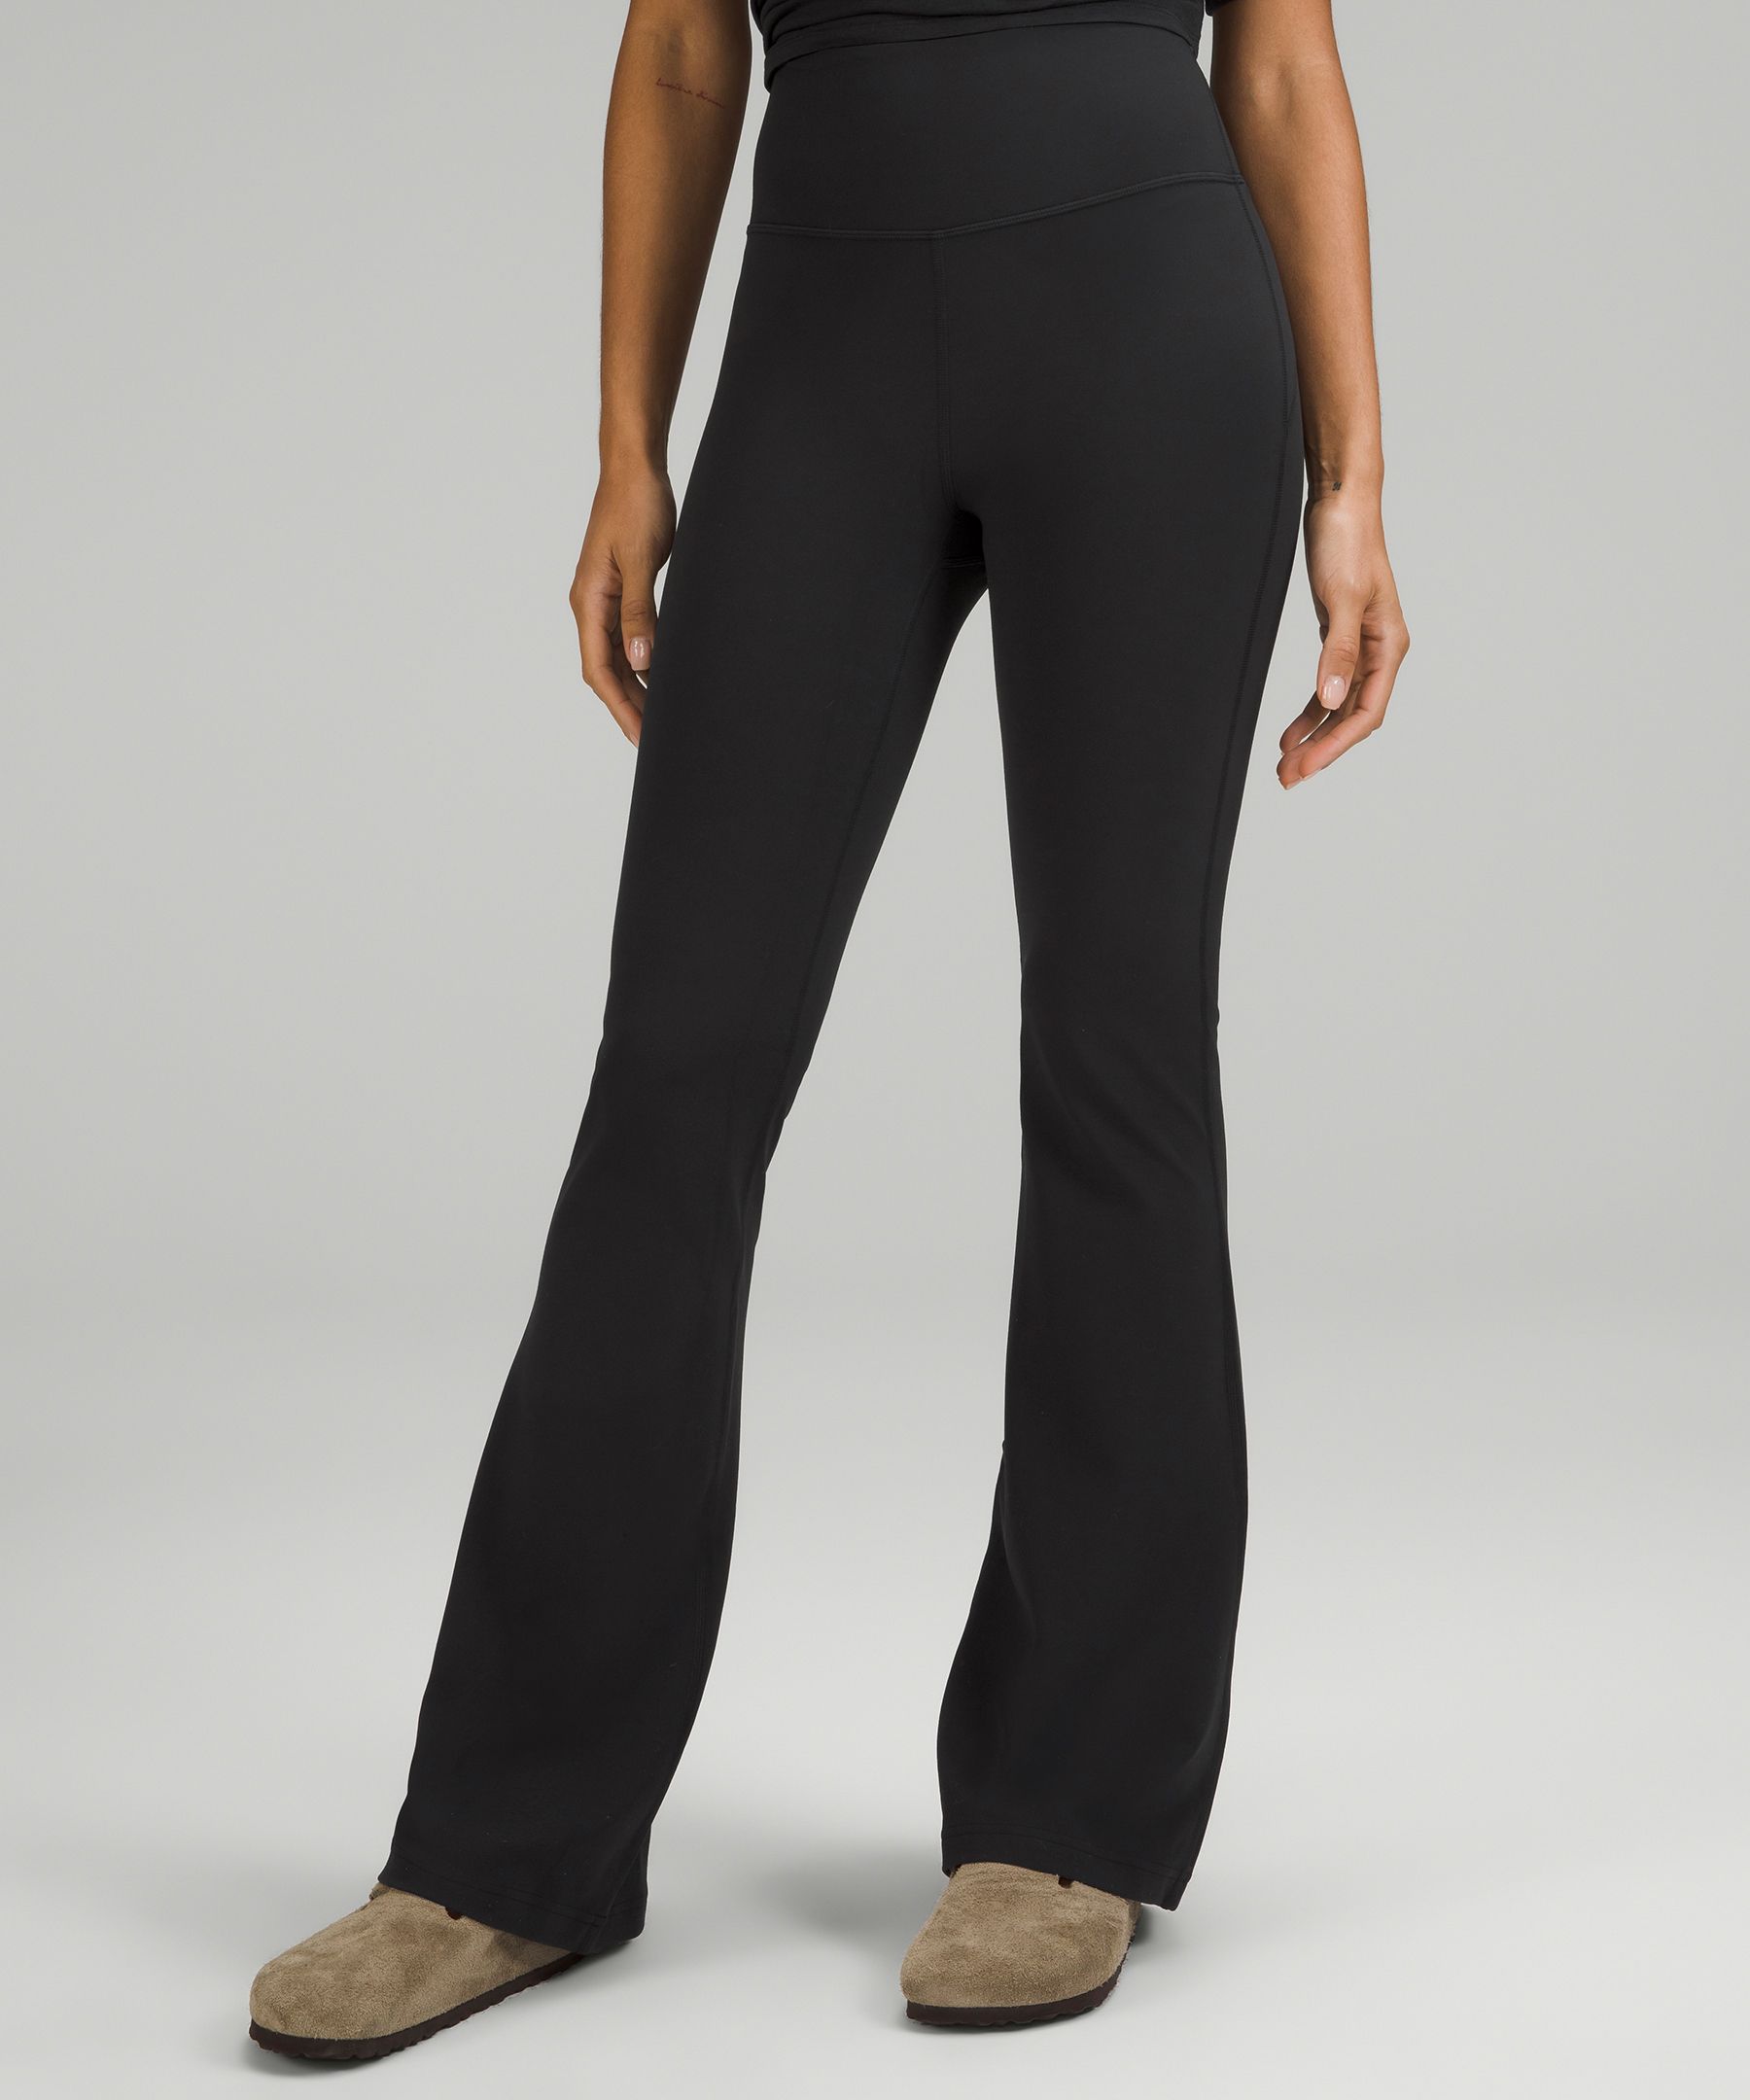 groove pant straight